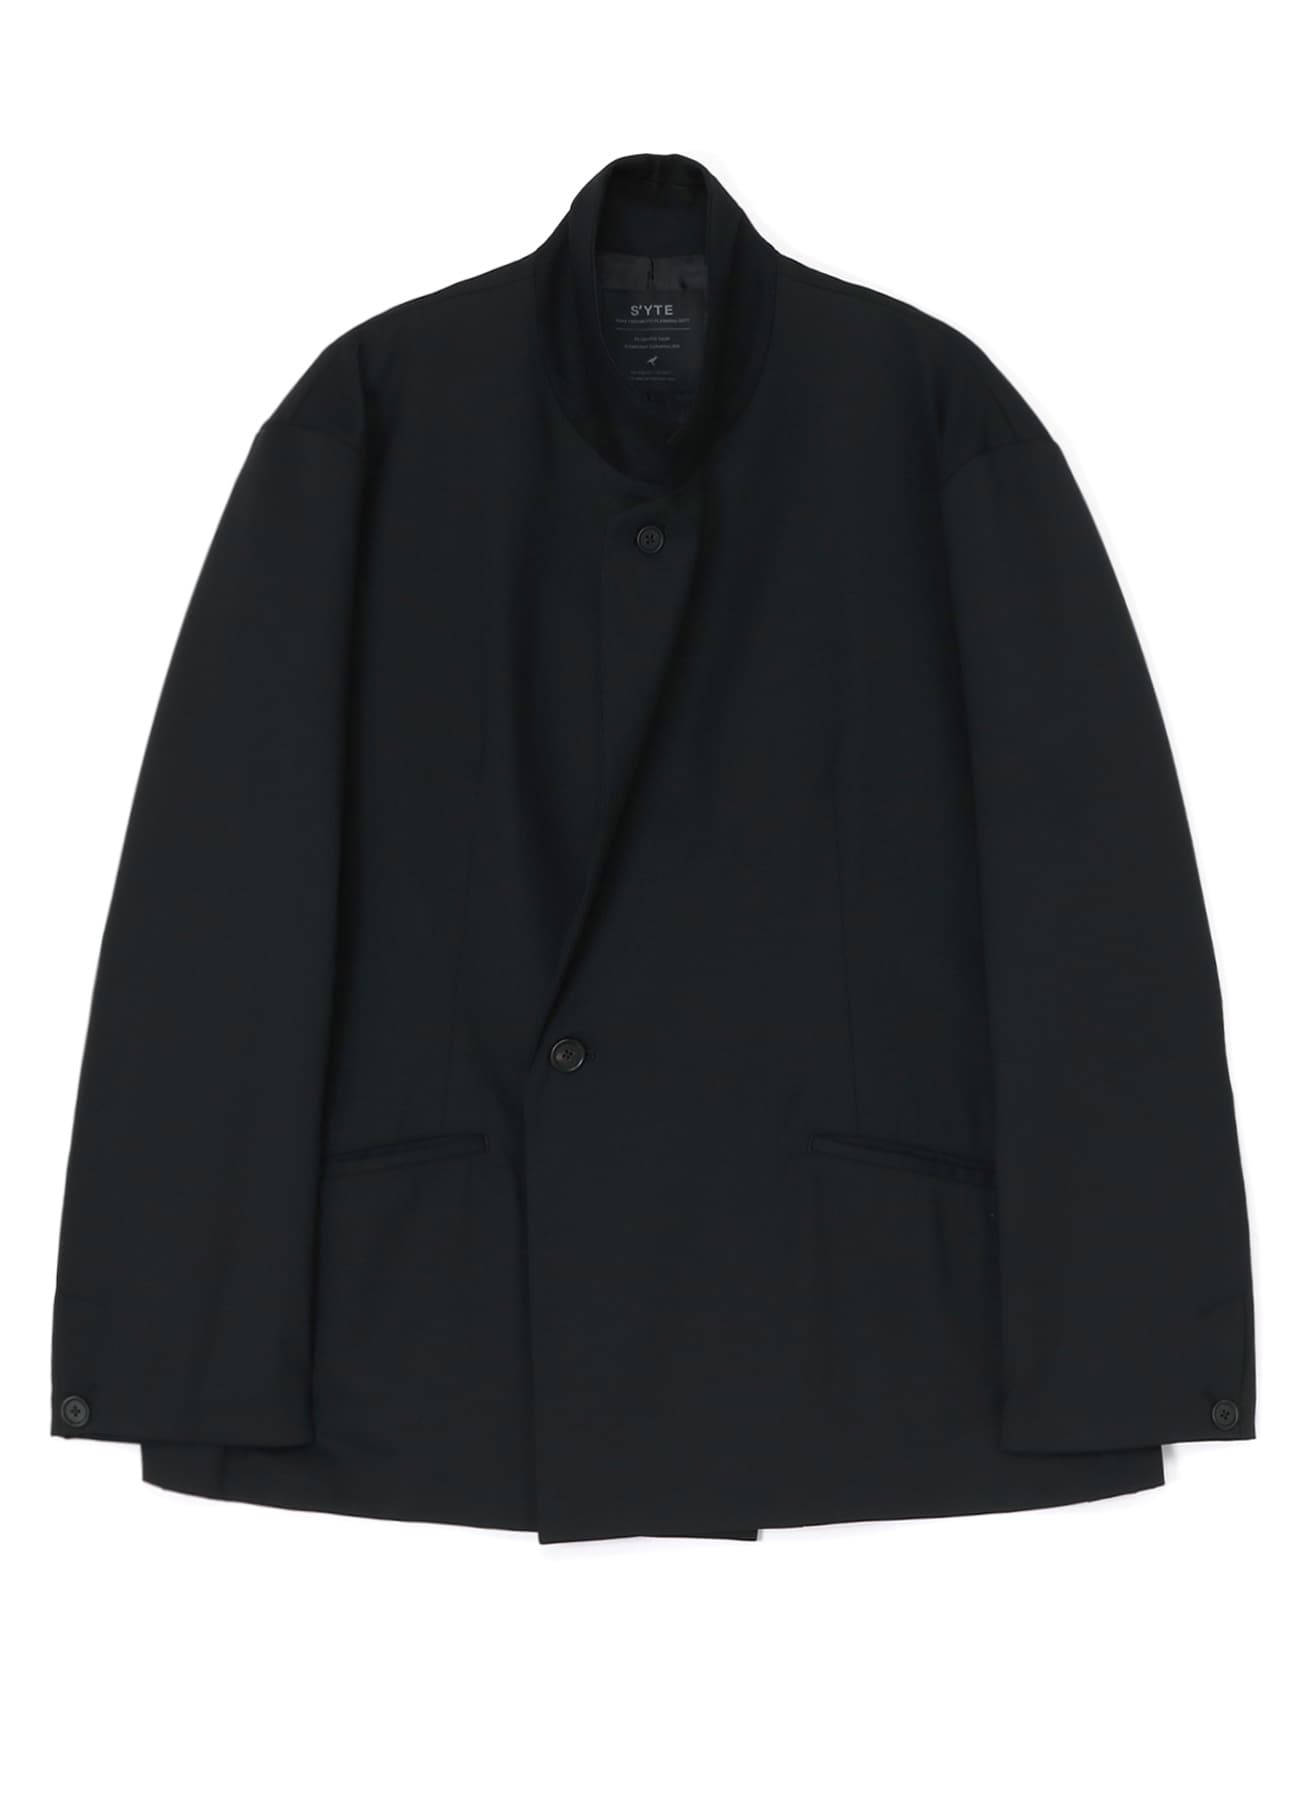 T/W GABARDINE DOUBLE-BREASTED JACKET WITH IRREGULAR BUTTONING(M 